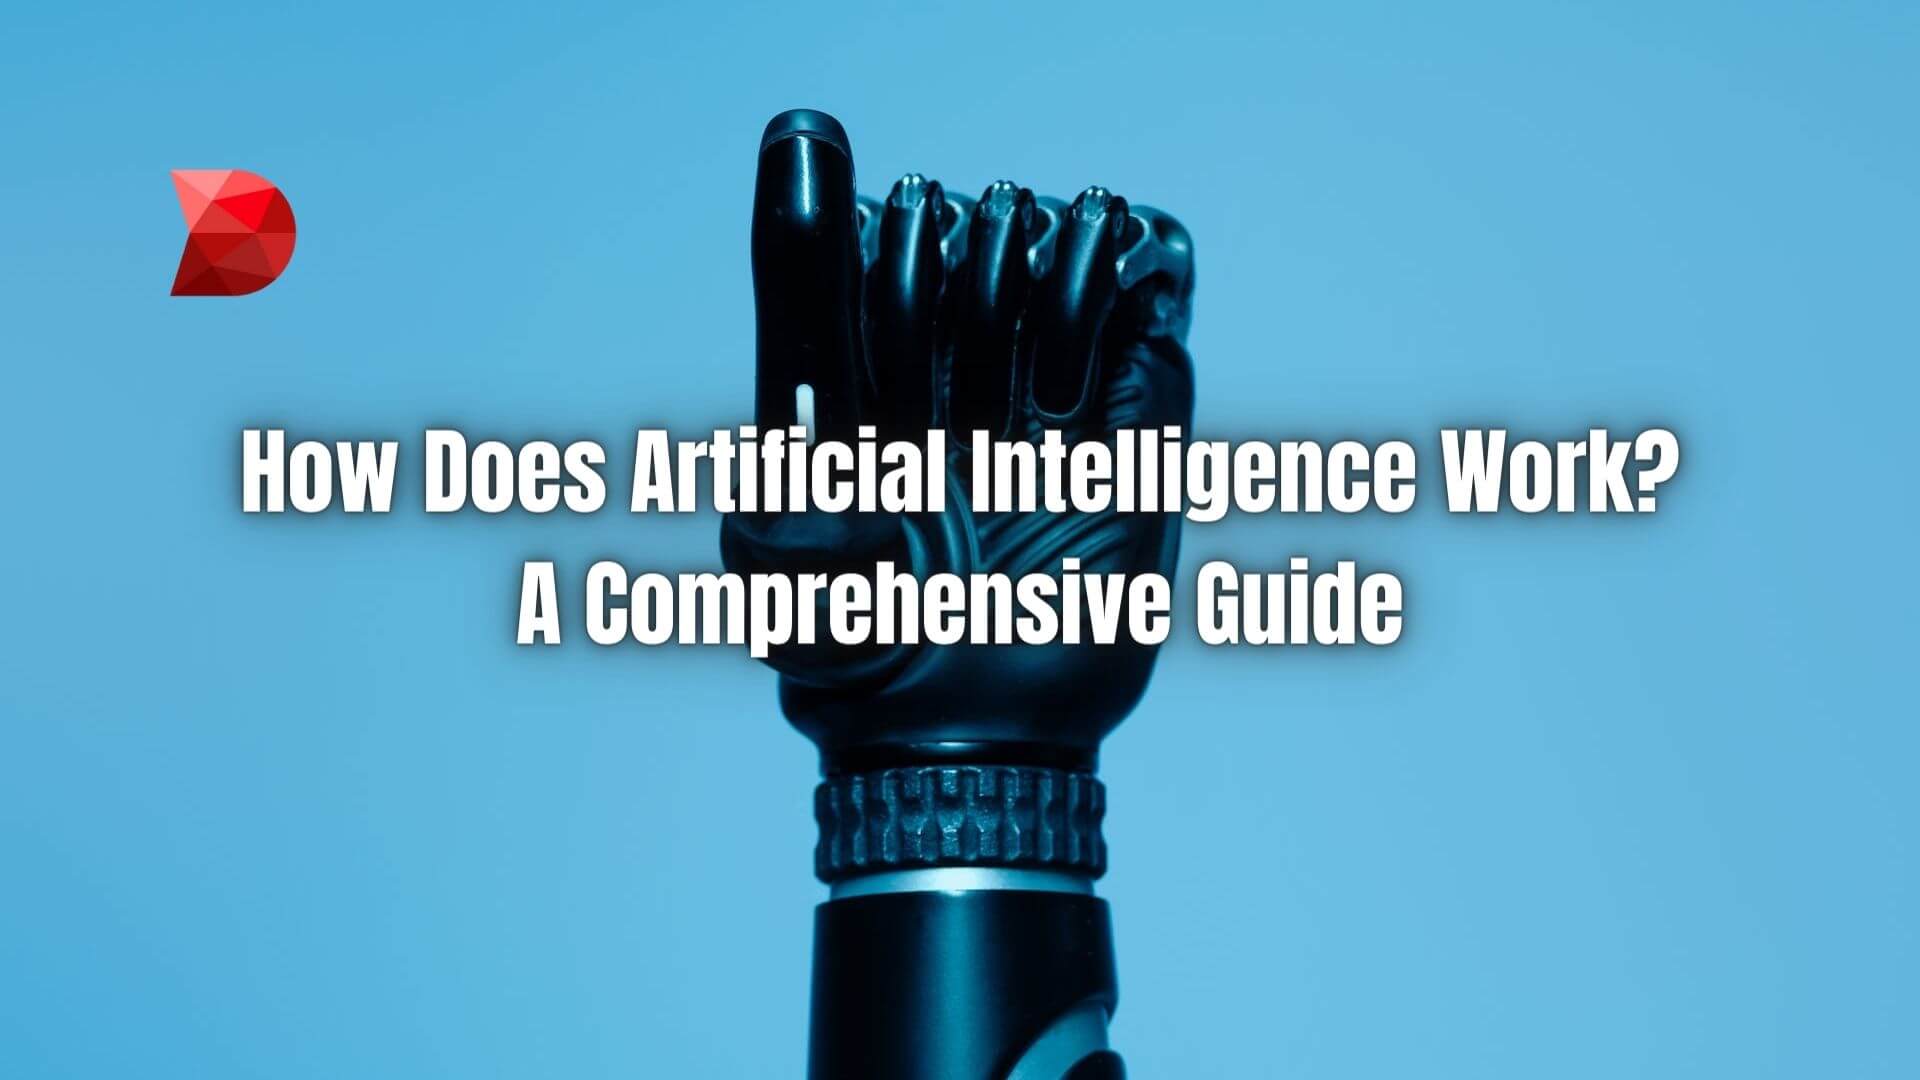 Explore the inner workings of Artificial Intelligence in this guide. Click here to uncover the mechanics behind AI's functionality.